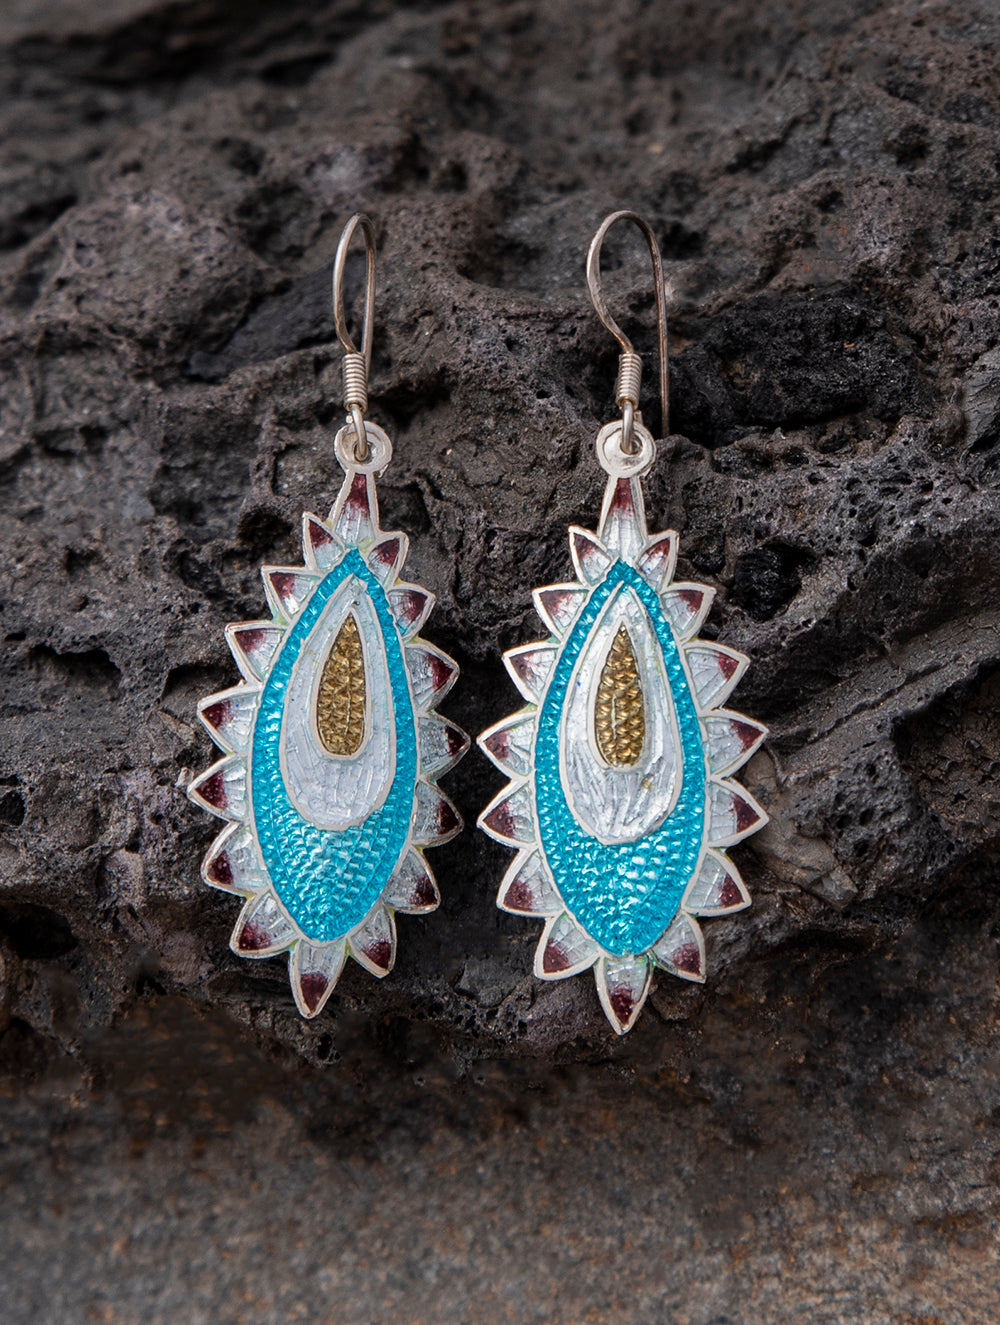 Chandbali Earrings - Buy 925 Silver Earrings Online at Best Price from  Praag Jewel | Handmade Jewellery | Latest Collection | Minimalist Jewellery  | Earrings for girls | Earrings for women | Exclusively for you